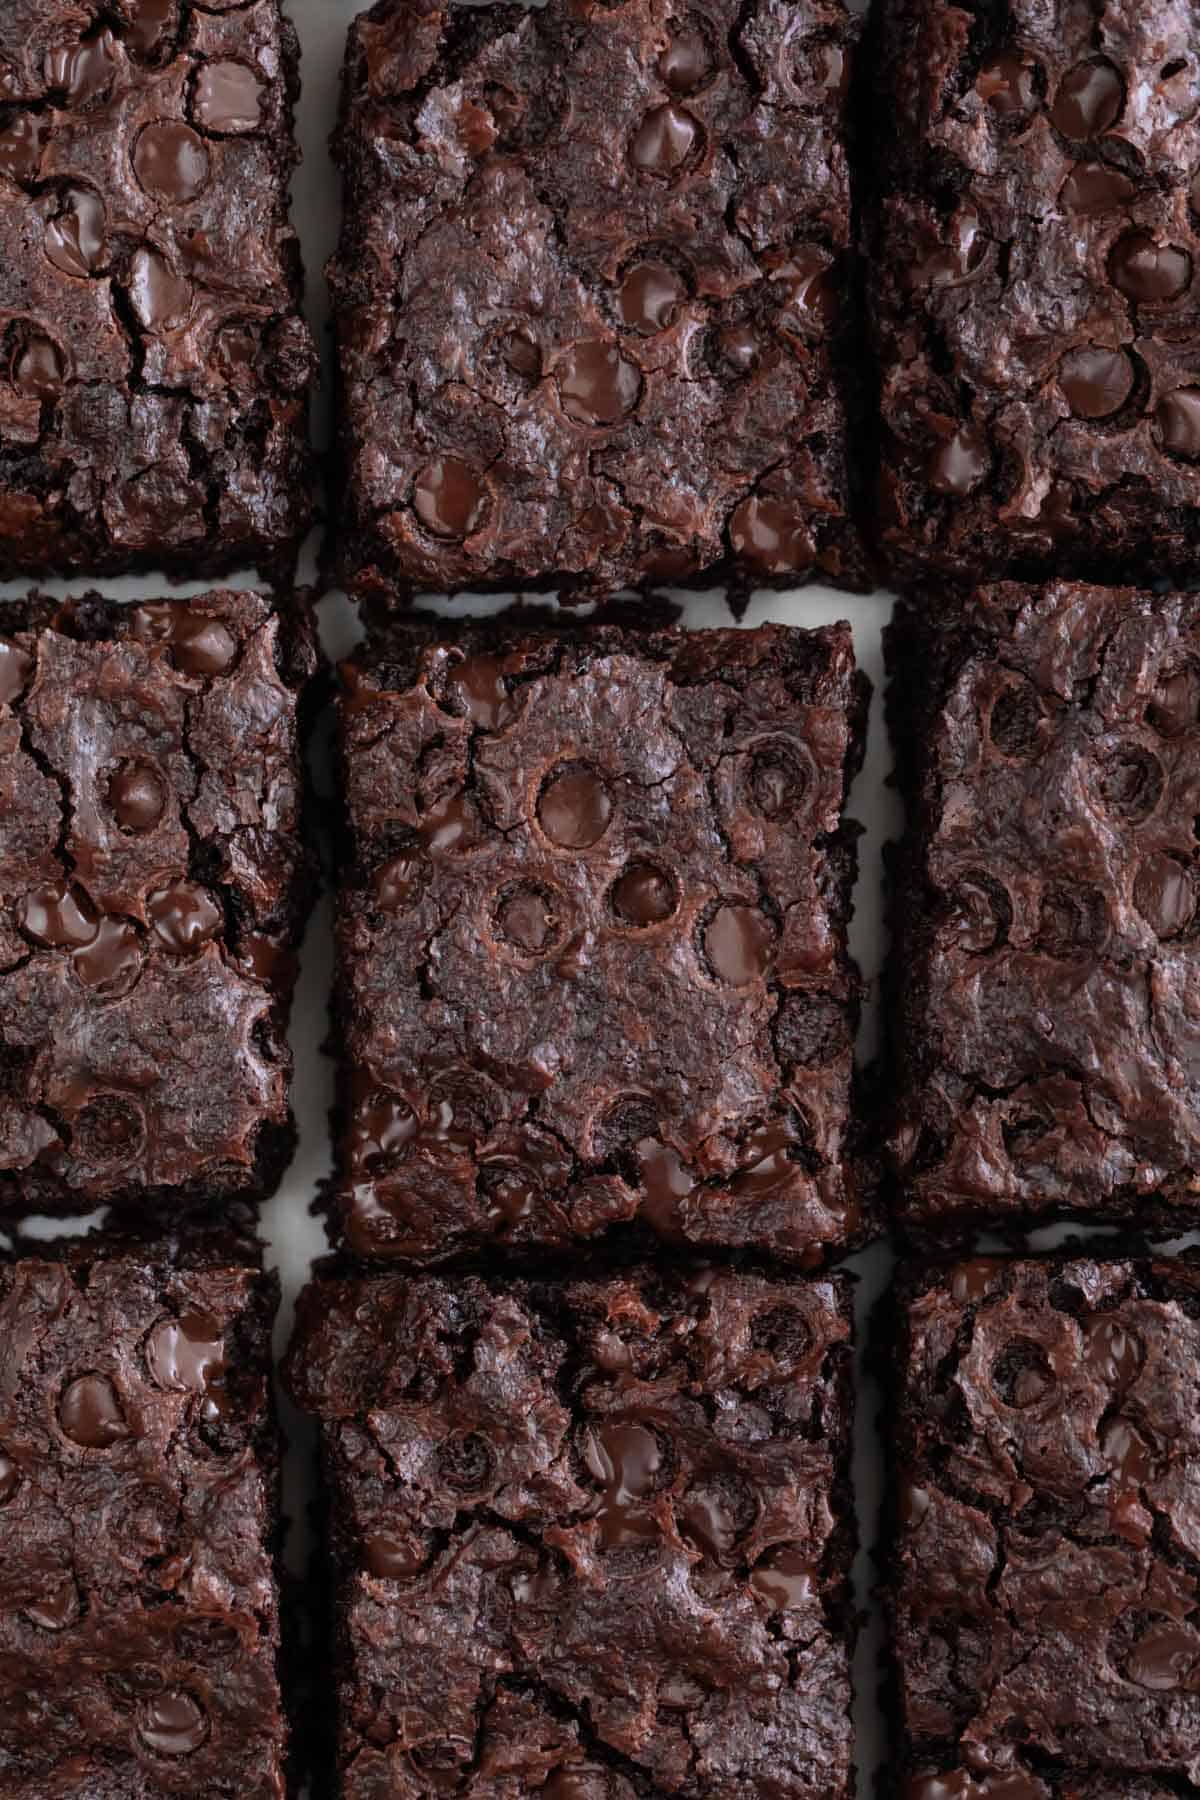 Overview of a vegan brownie cut into pieces.